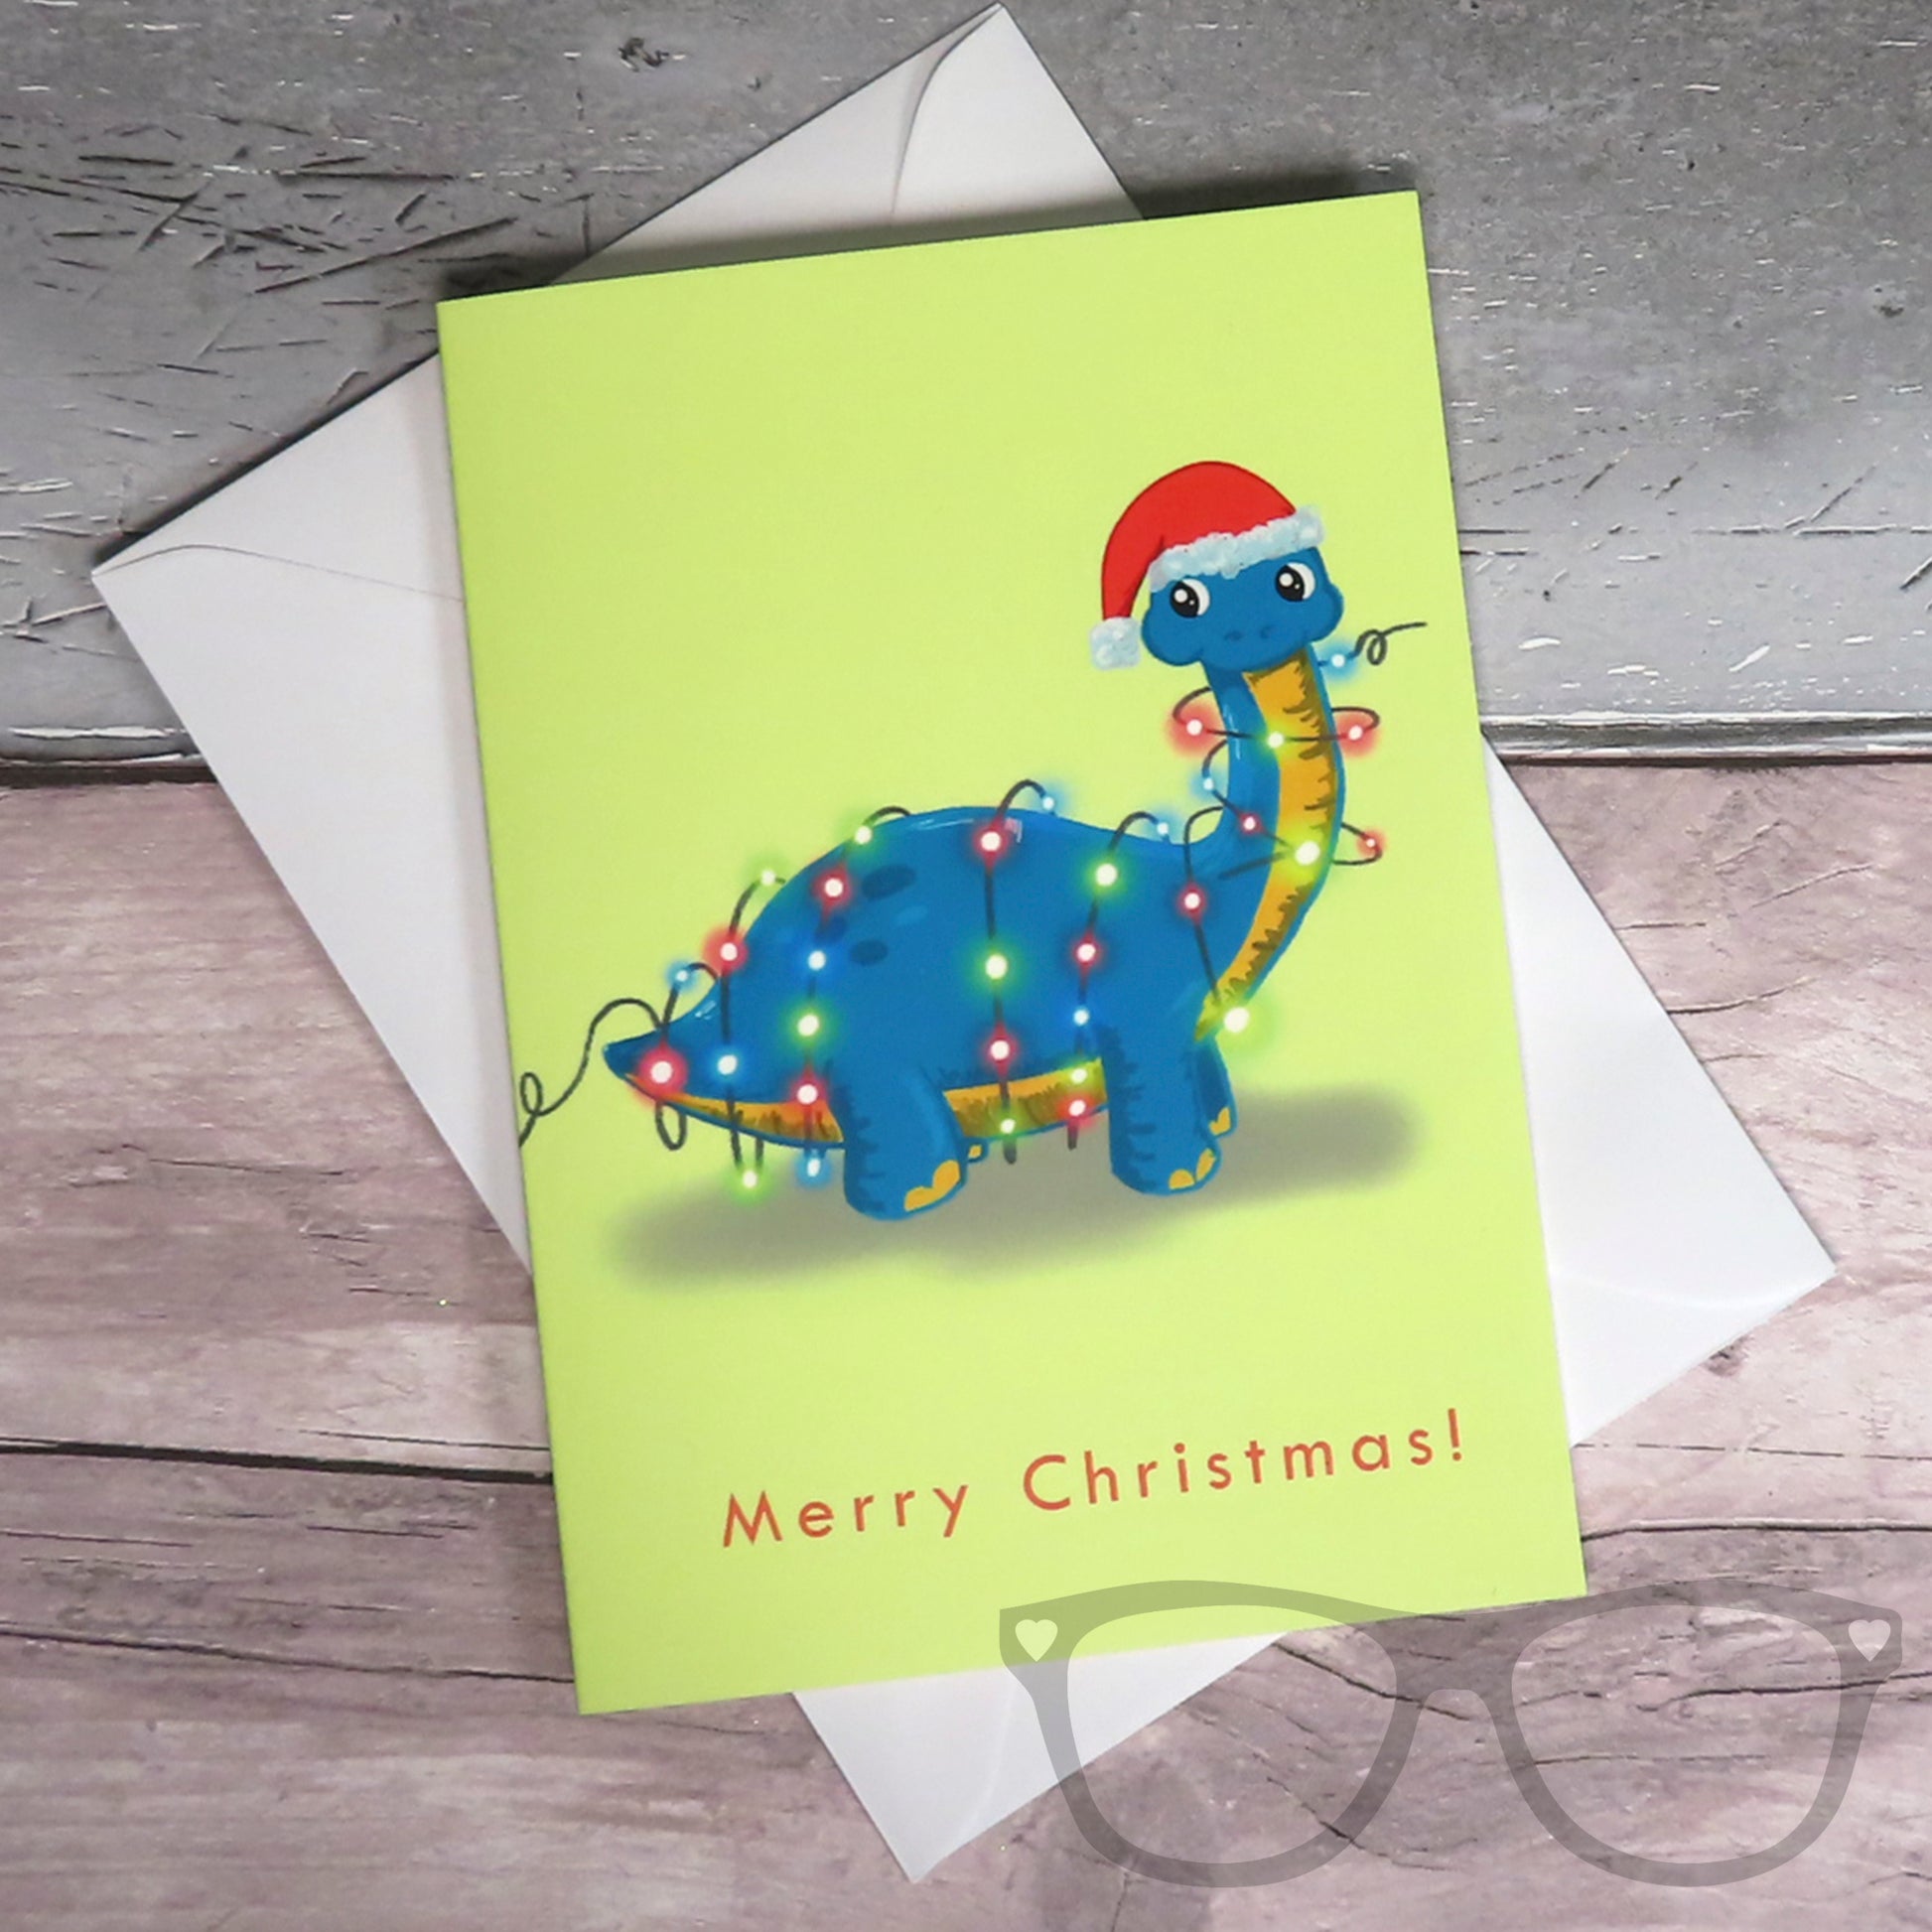 Christmas Card with a dinosaur tangled in fairy lights, a green brachiosaurus is standing on a yellow background wearing a festive santa hat. The card lays flat with the white envelope underneath